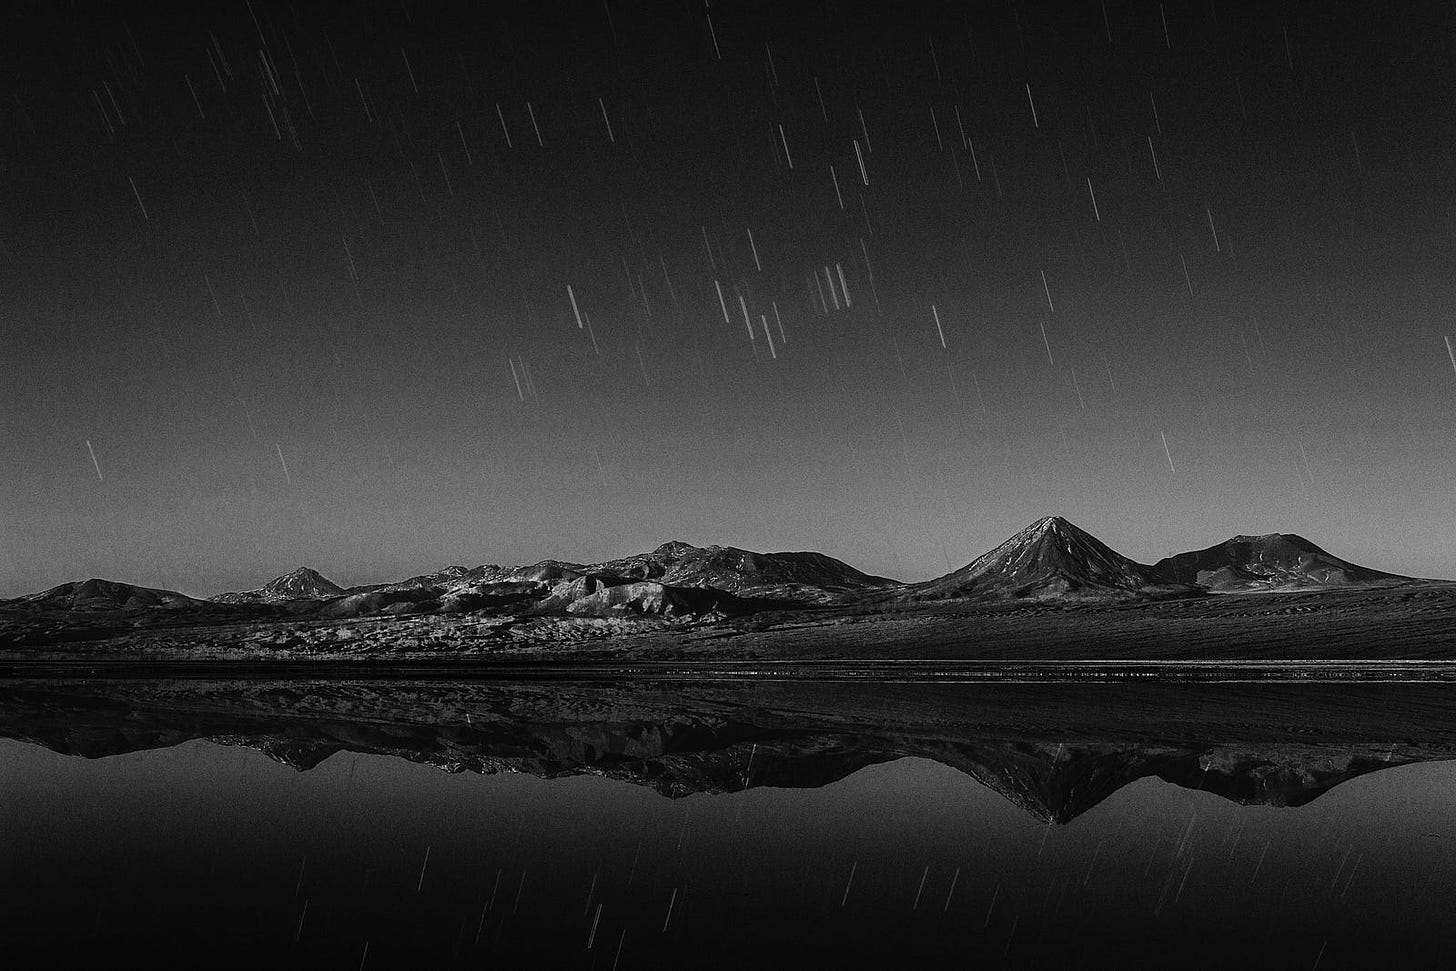 A meteor shower photographed over a lake reflecting mountains.